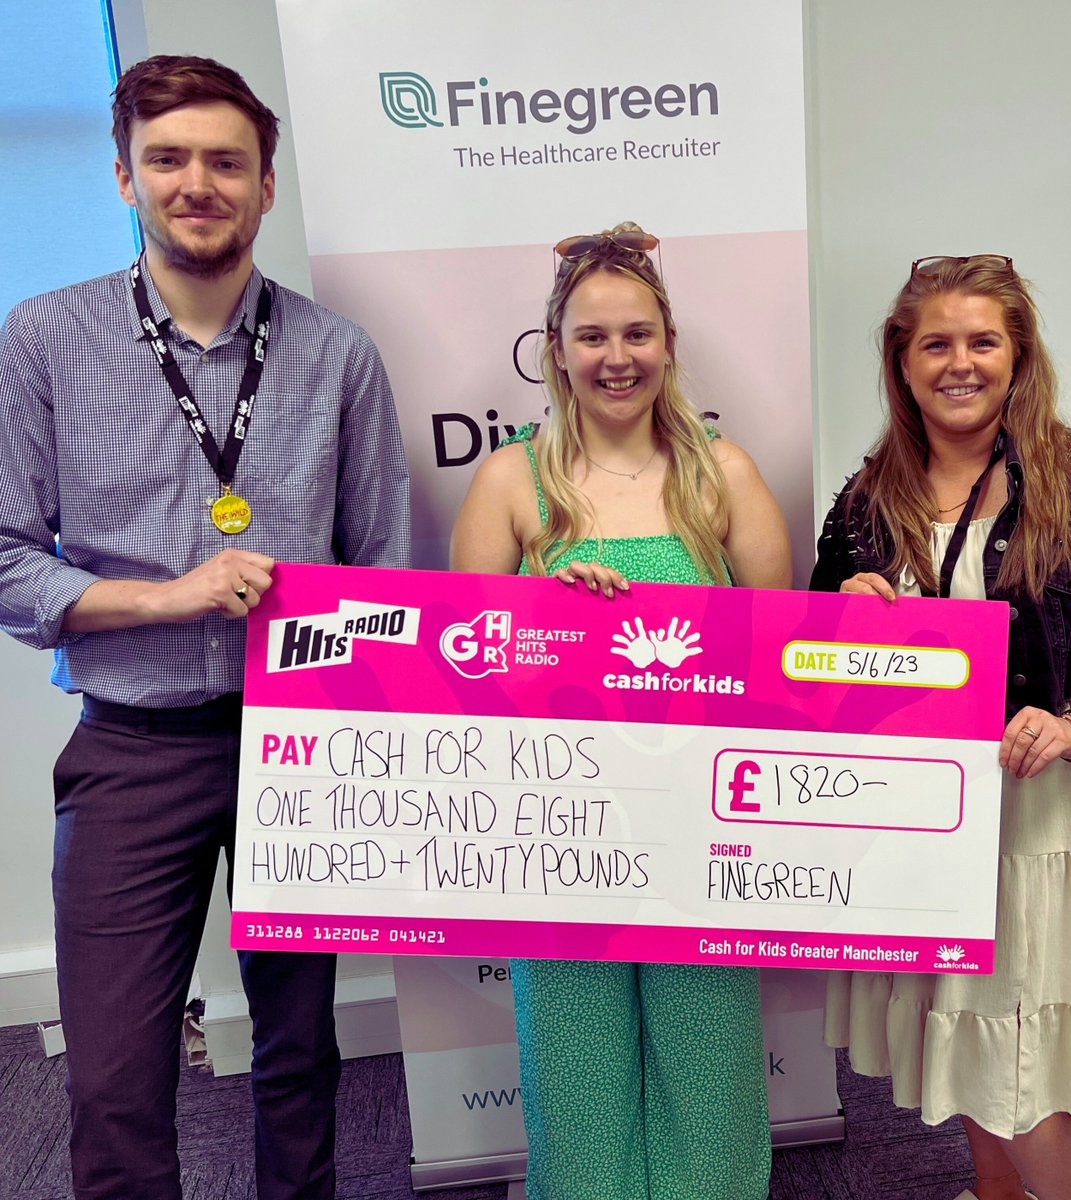 We were delighted to be joined by Lucy Summerton from @hitsradiouk who accepted our cheque of £1,820 for the #CashforKids charity.
Congratulations to Finegreen's Sean and Olivia, who recently undertook the ‘Survive the Wild Challenge’ to help raise funds for this fantastic cause.